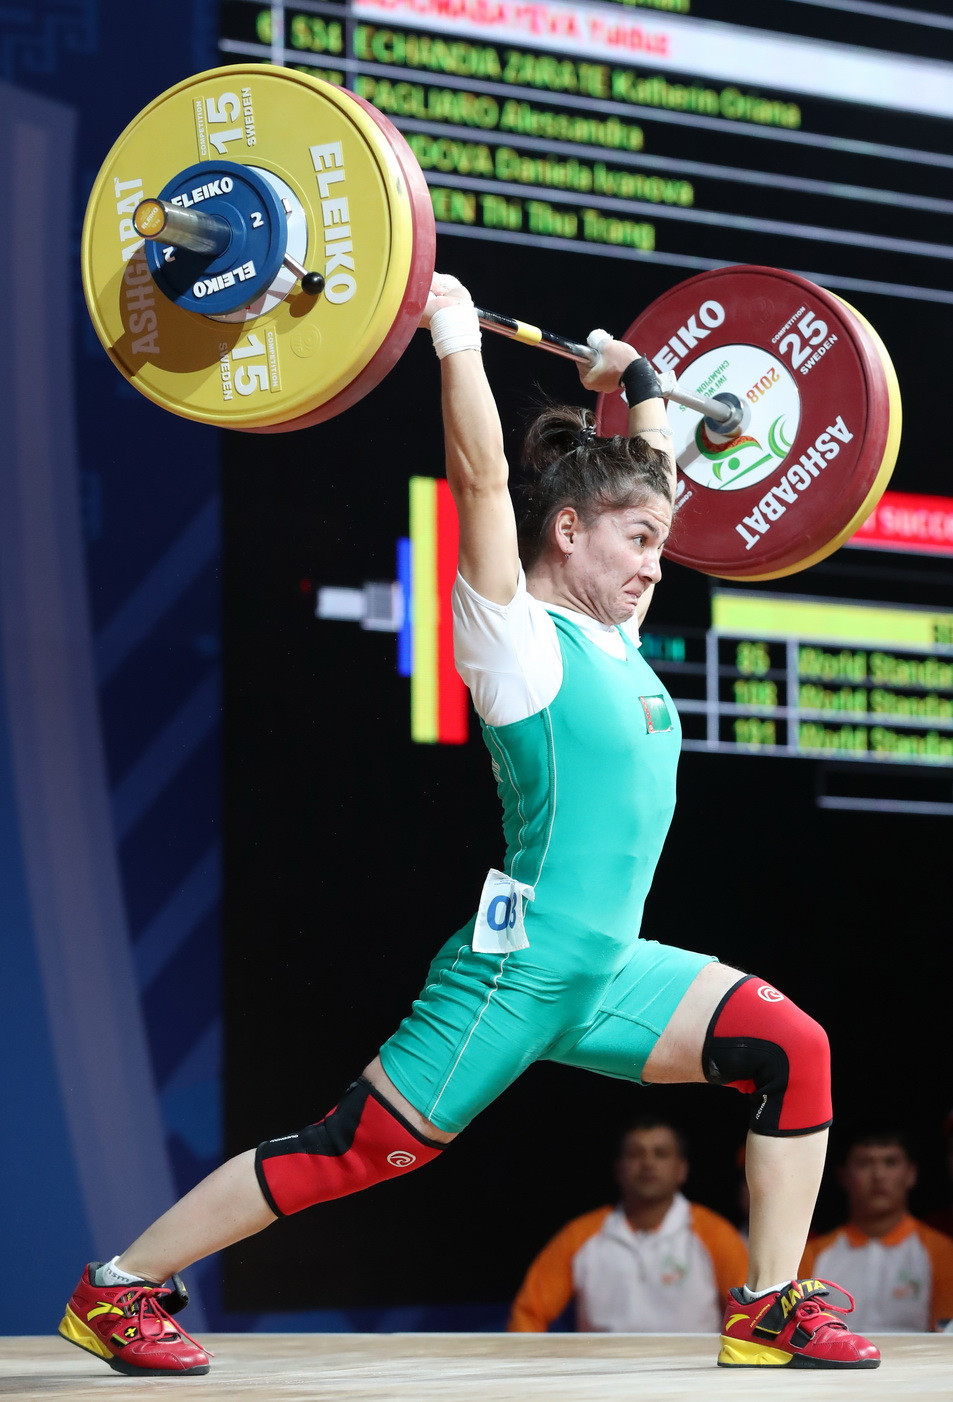 IWF upgrade two World Championship medals claimed by home favourite Dzhumabayeva